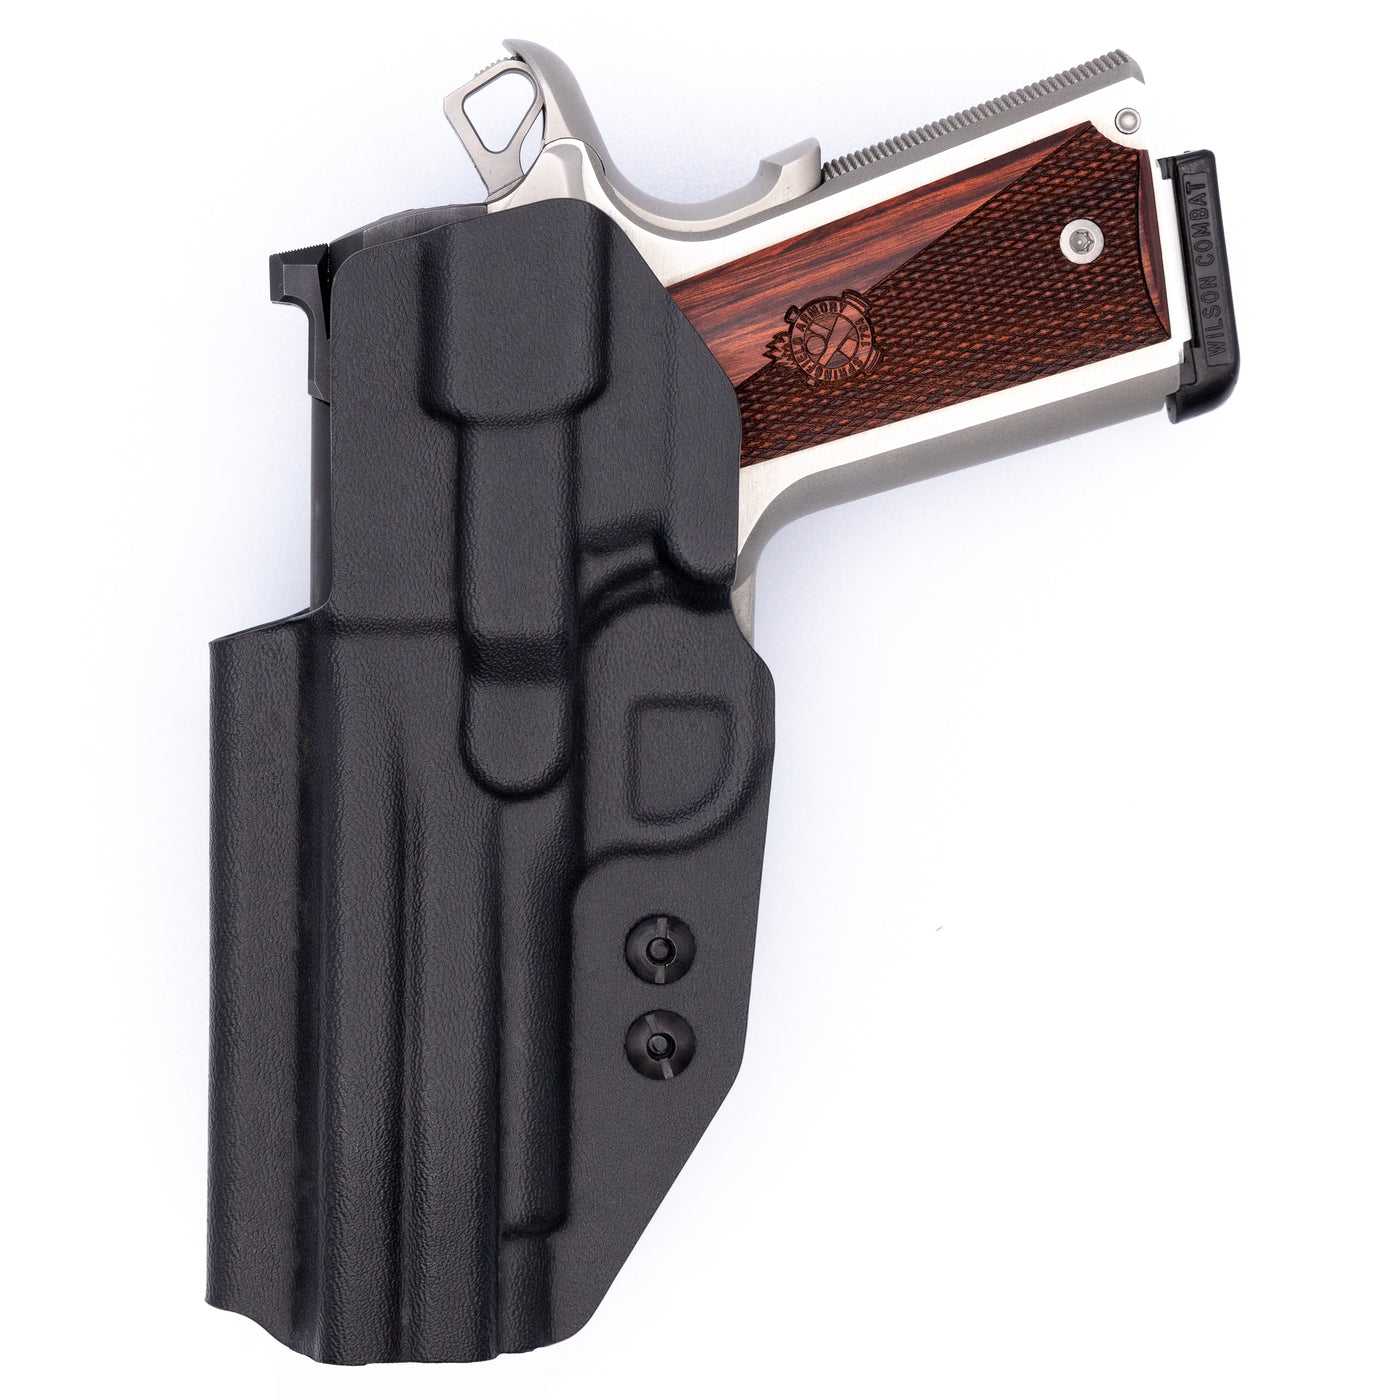 This is the quickship C&G Holsters inside the waistband holster for a 1911 4.25". 